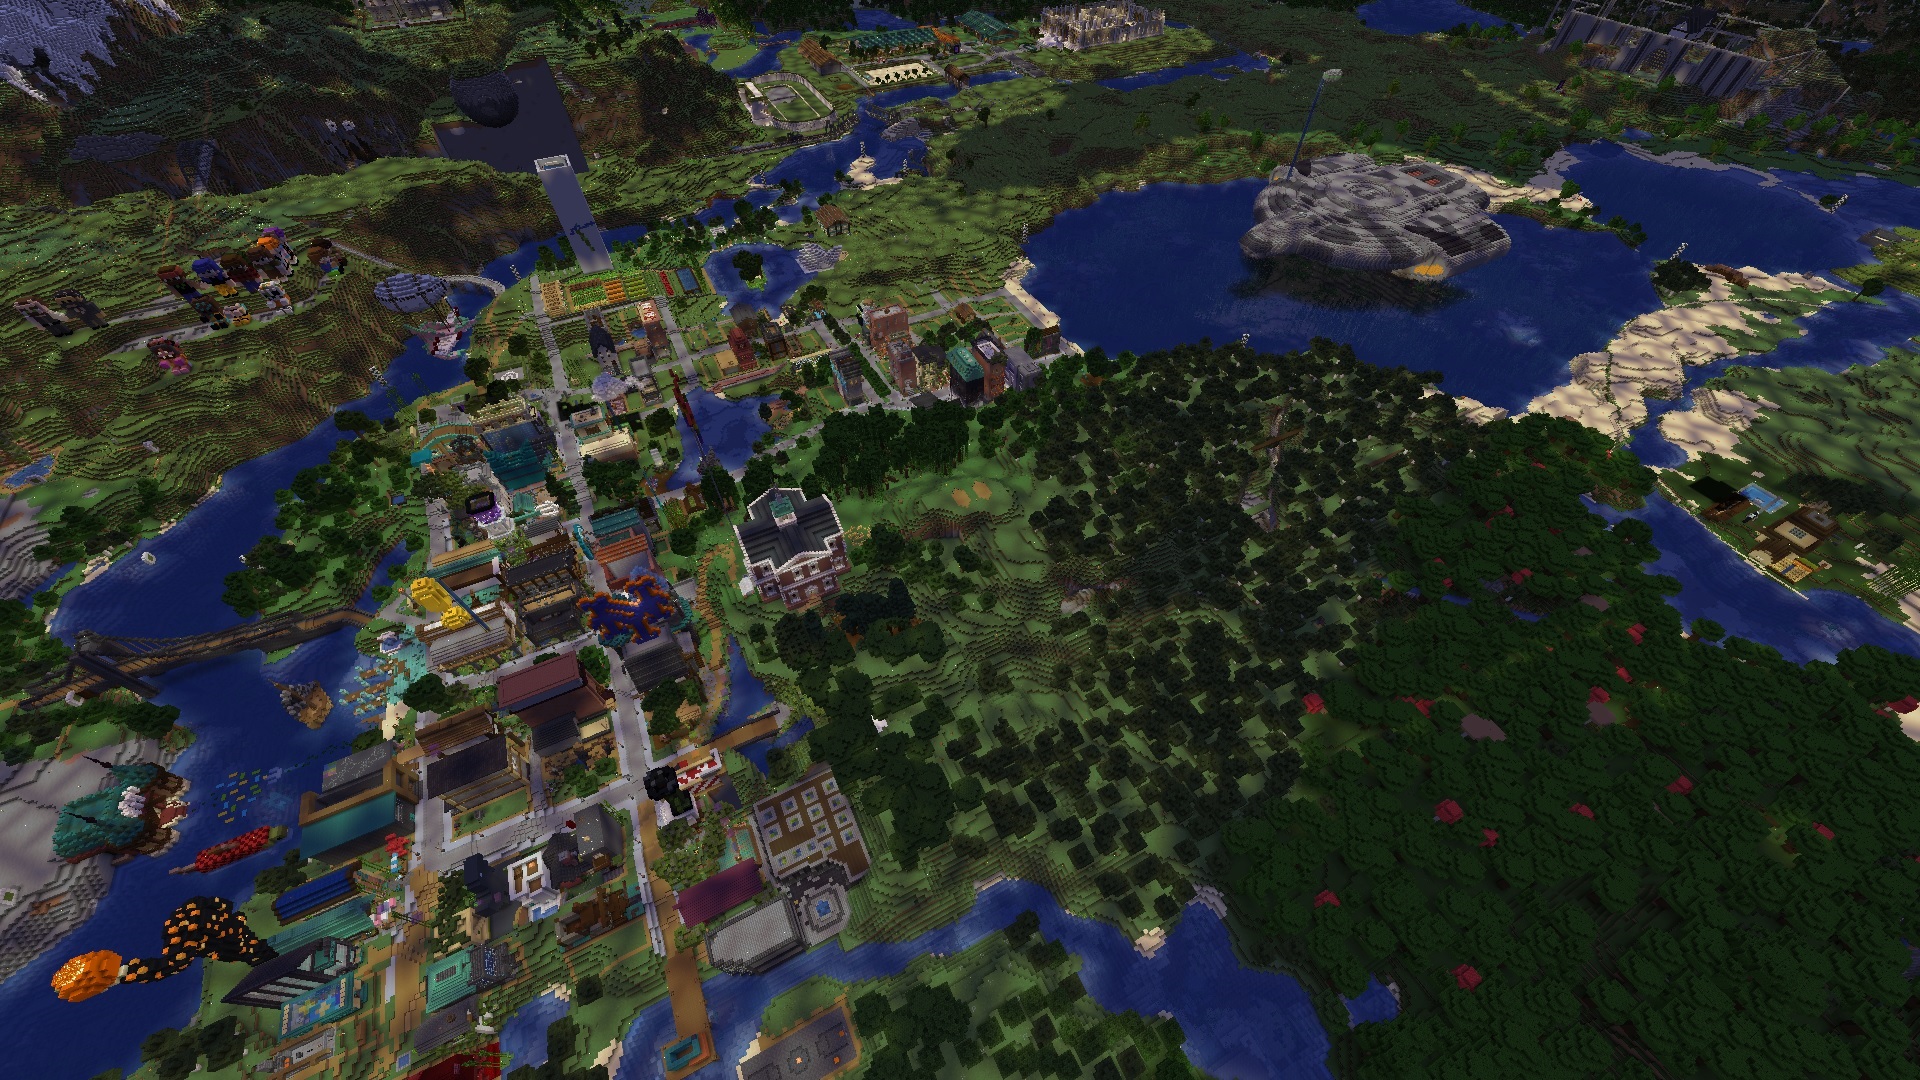 A minecraft screenshot of the Deep Slate Nine server at night. It is an overhead shot of the spawn town, Spilly, with a spaceship from star trek named The Defiant in the background.